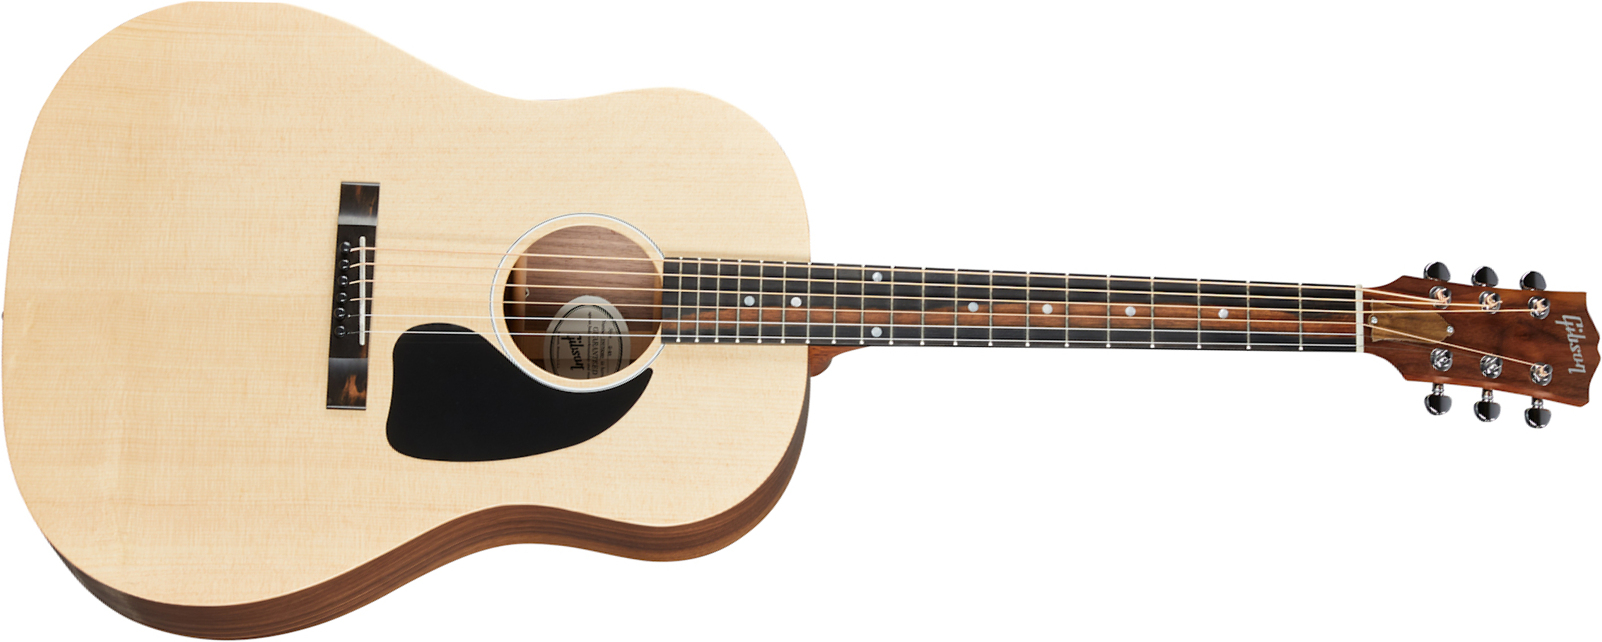 Gibson G-45 Modern Dreadnought Epicea Noyer Wal Eb - Natural Satin - Guitare Acoustique - Main picture